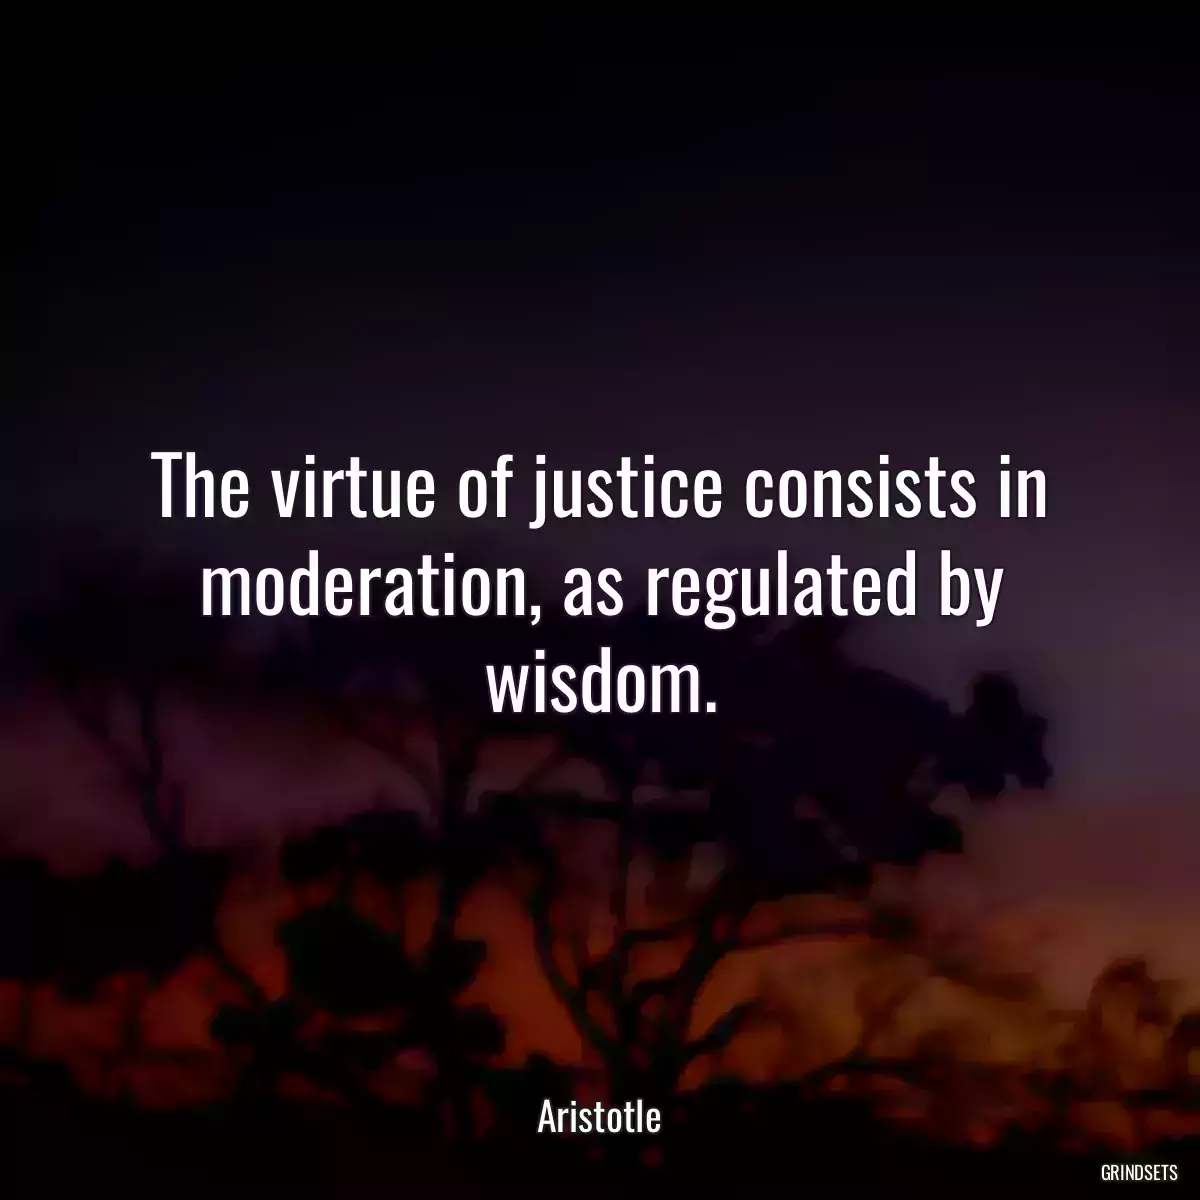 The virtue of justice consists in moderation, as regulated by wisdom.